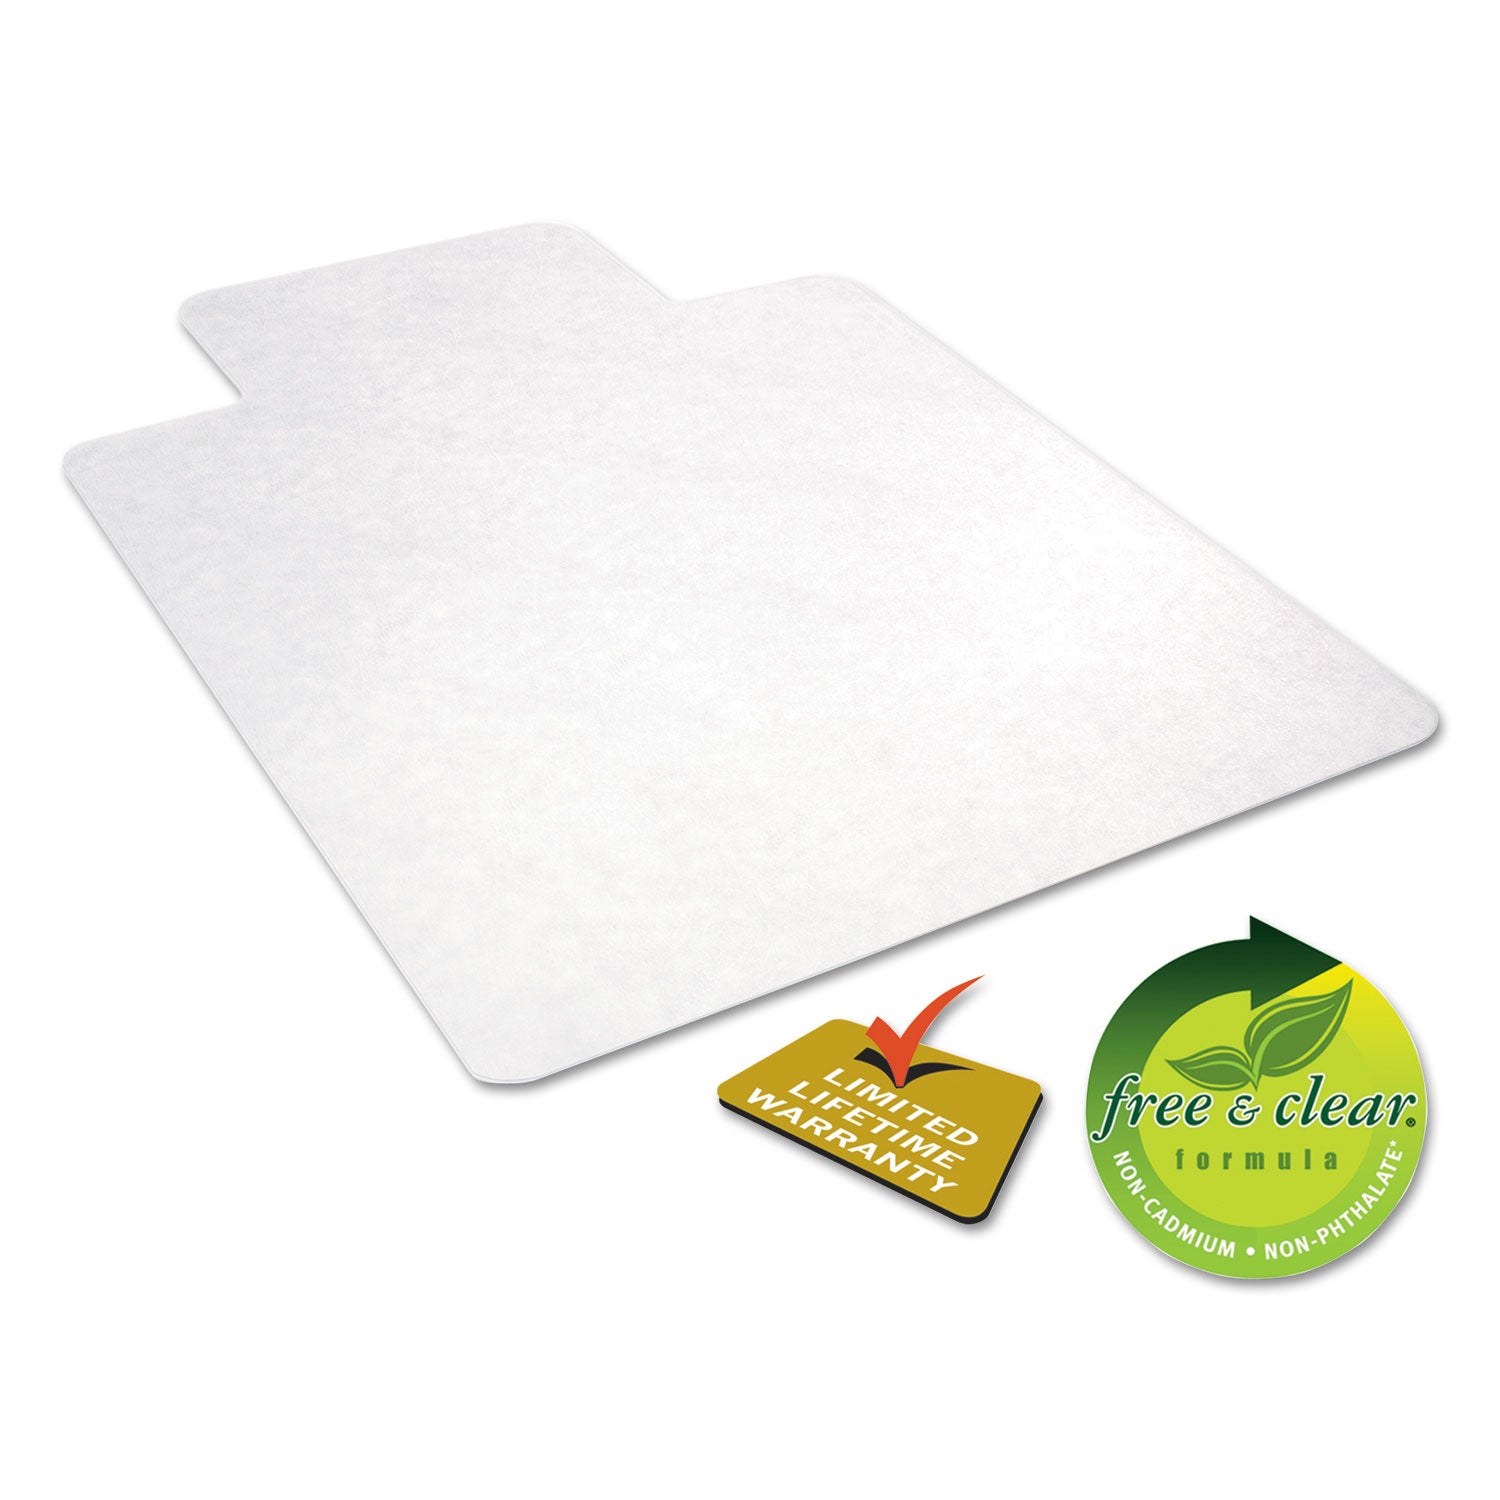 all-day-use-non-studded-chair-mat-for-hard-floors-36-x-48-lipped-clear_alemat3648hfl - 6